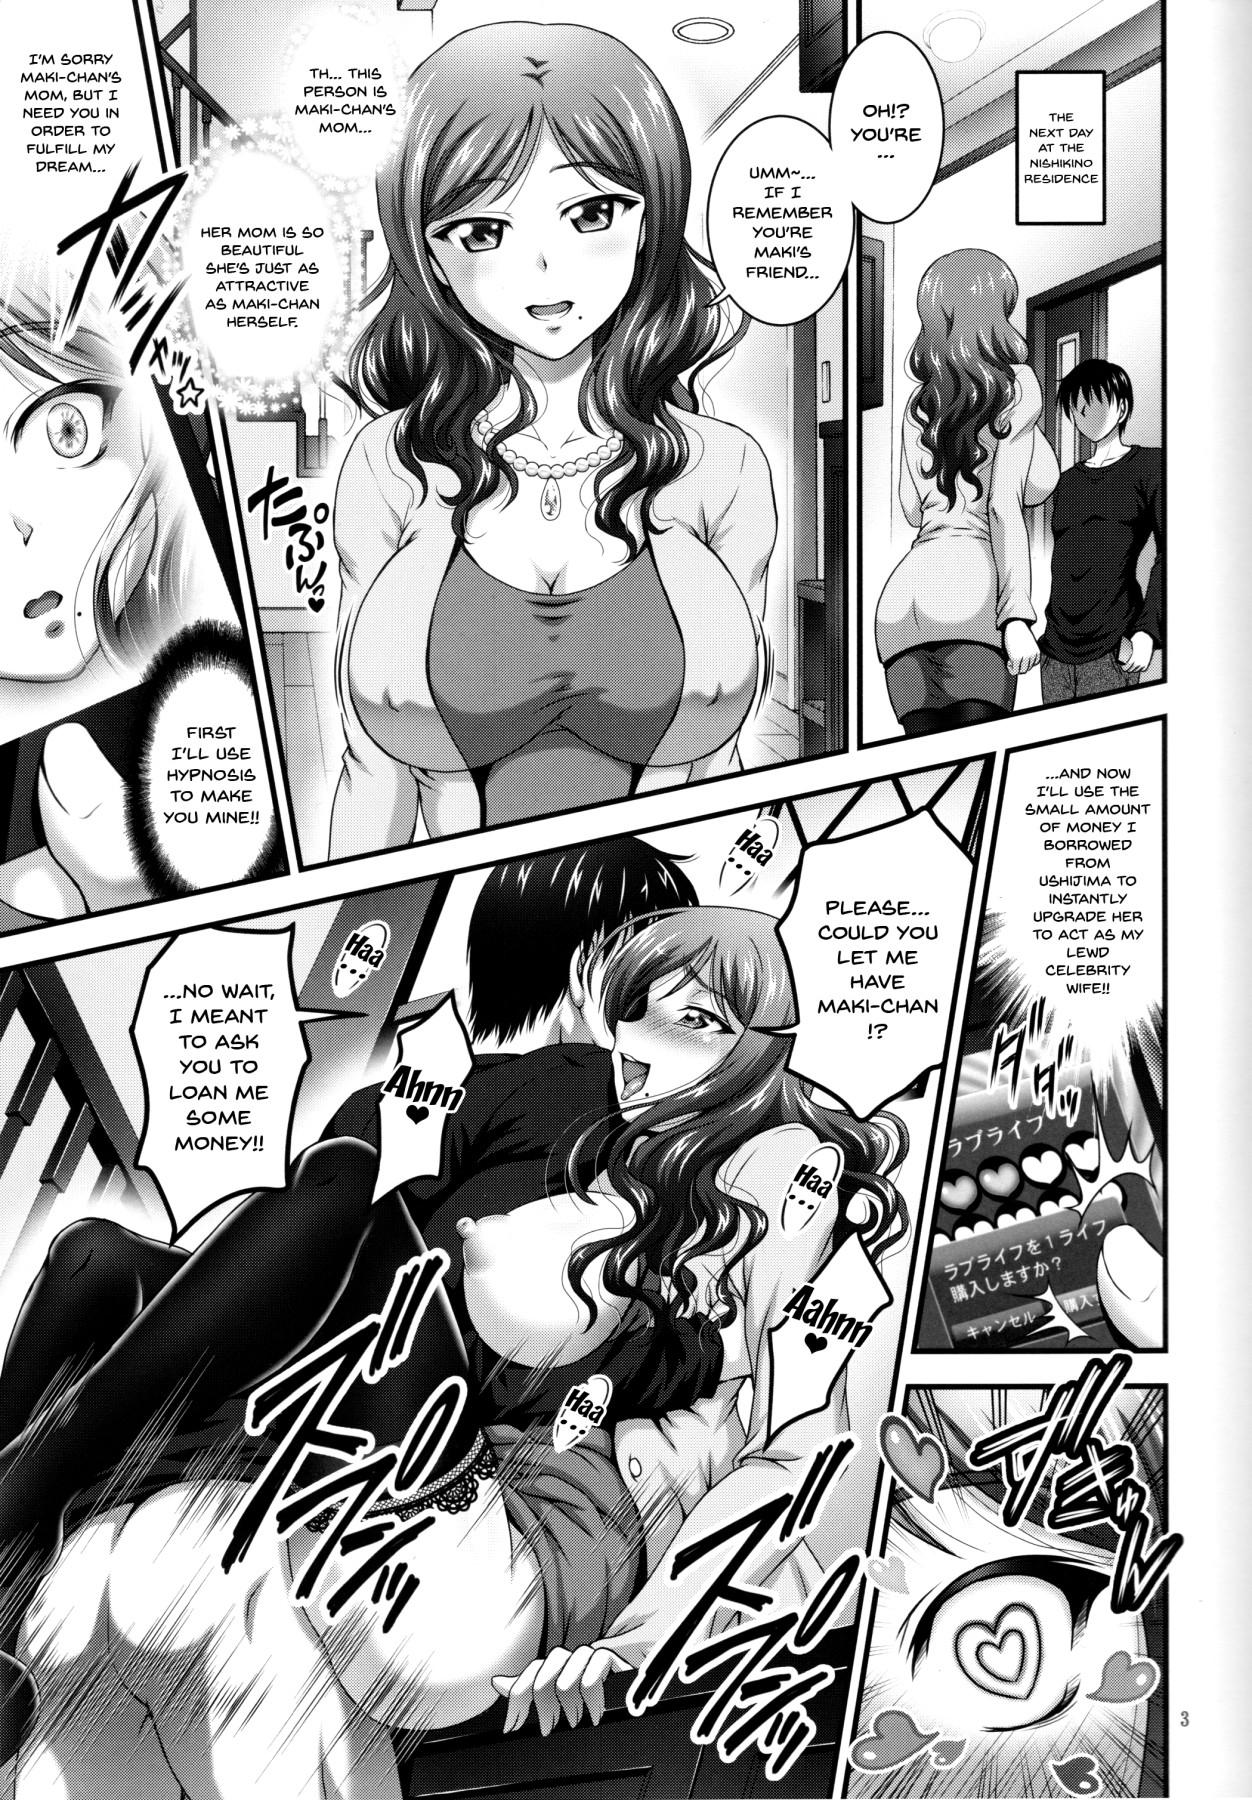 Desperate Ore Yome Saimin 4 | My Wife Hypnosis 4 - Love live Facials - Page 4